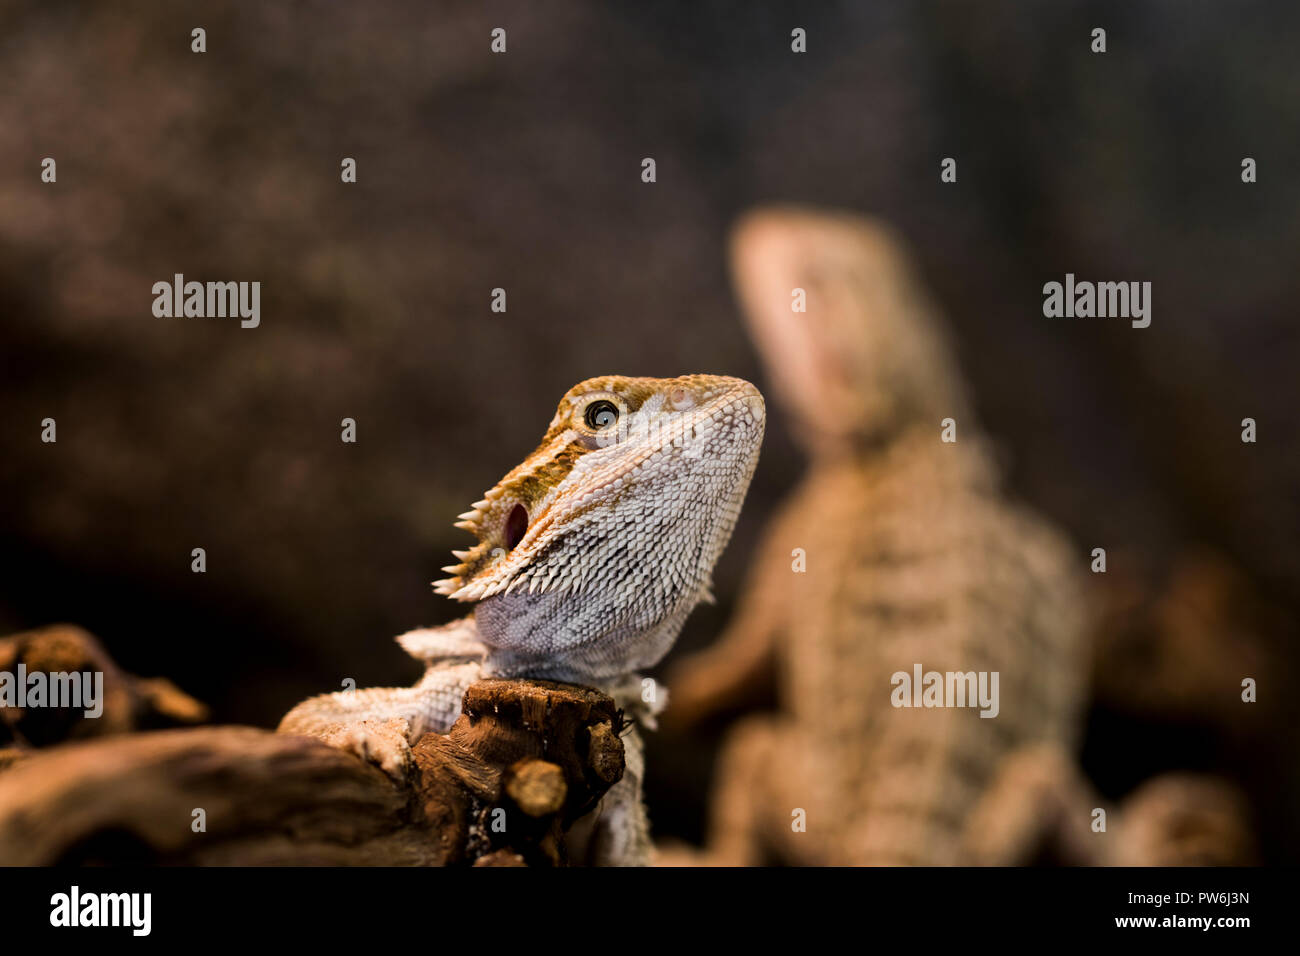 Small Geckos resting and sun bathing. Cold blooded lizard close up. Stock Photo